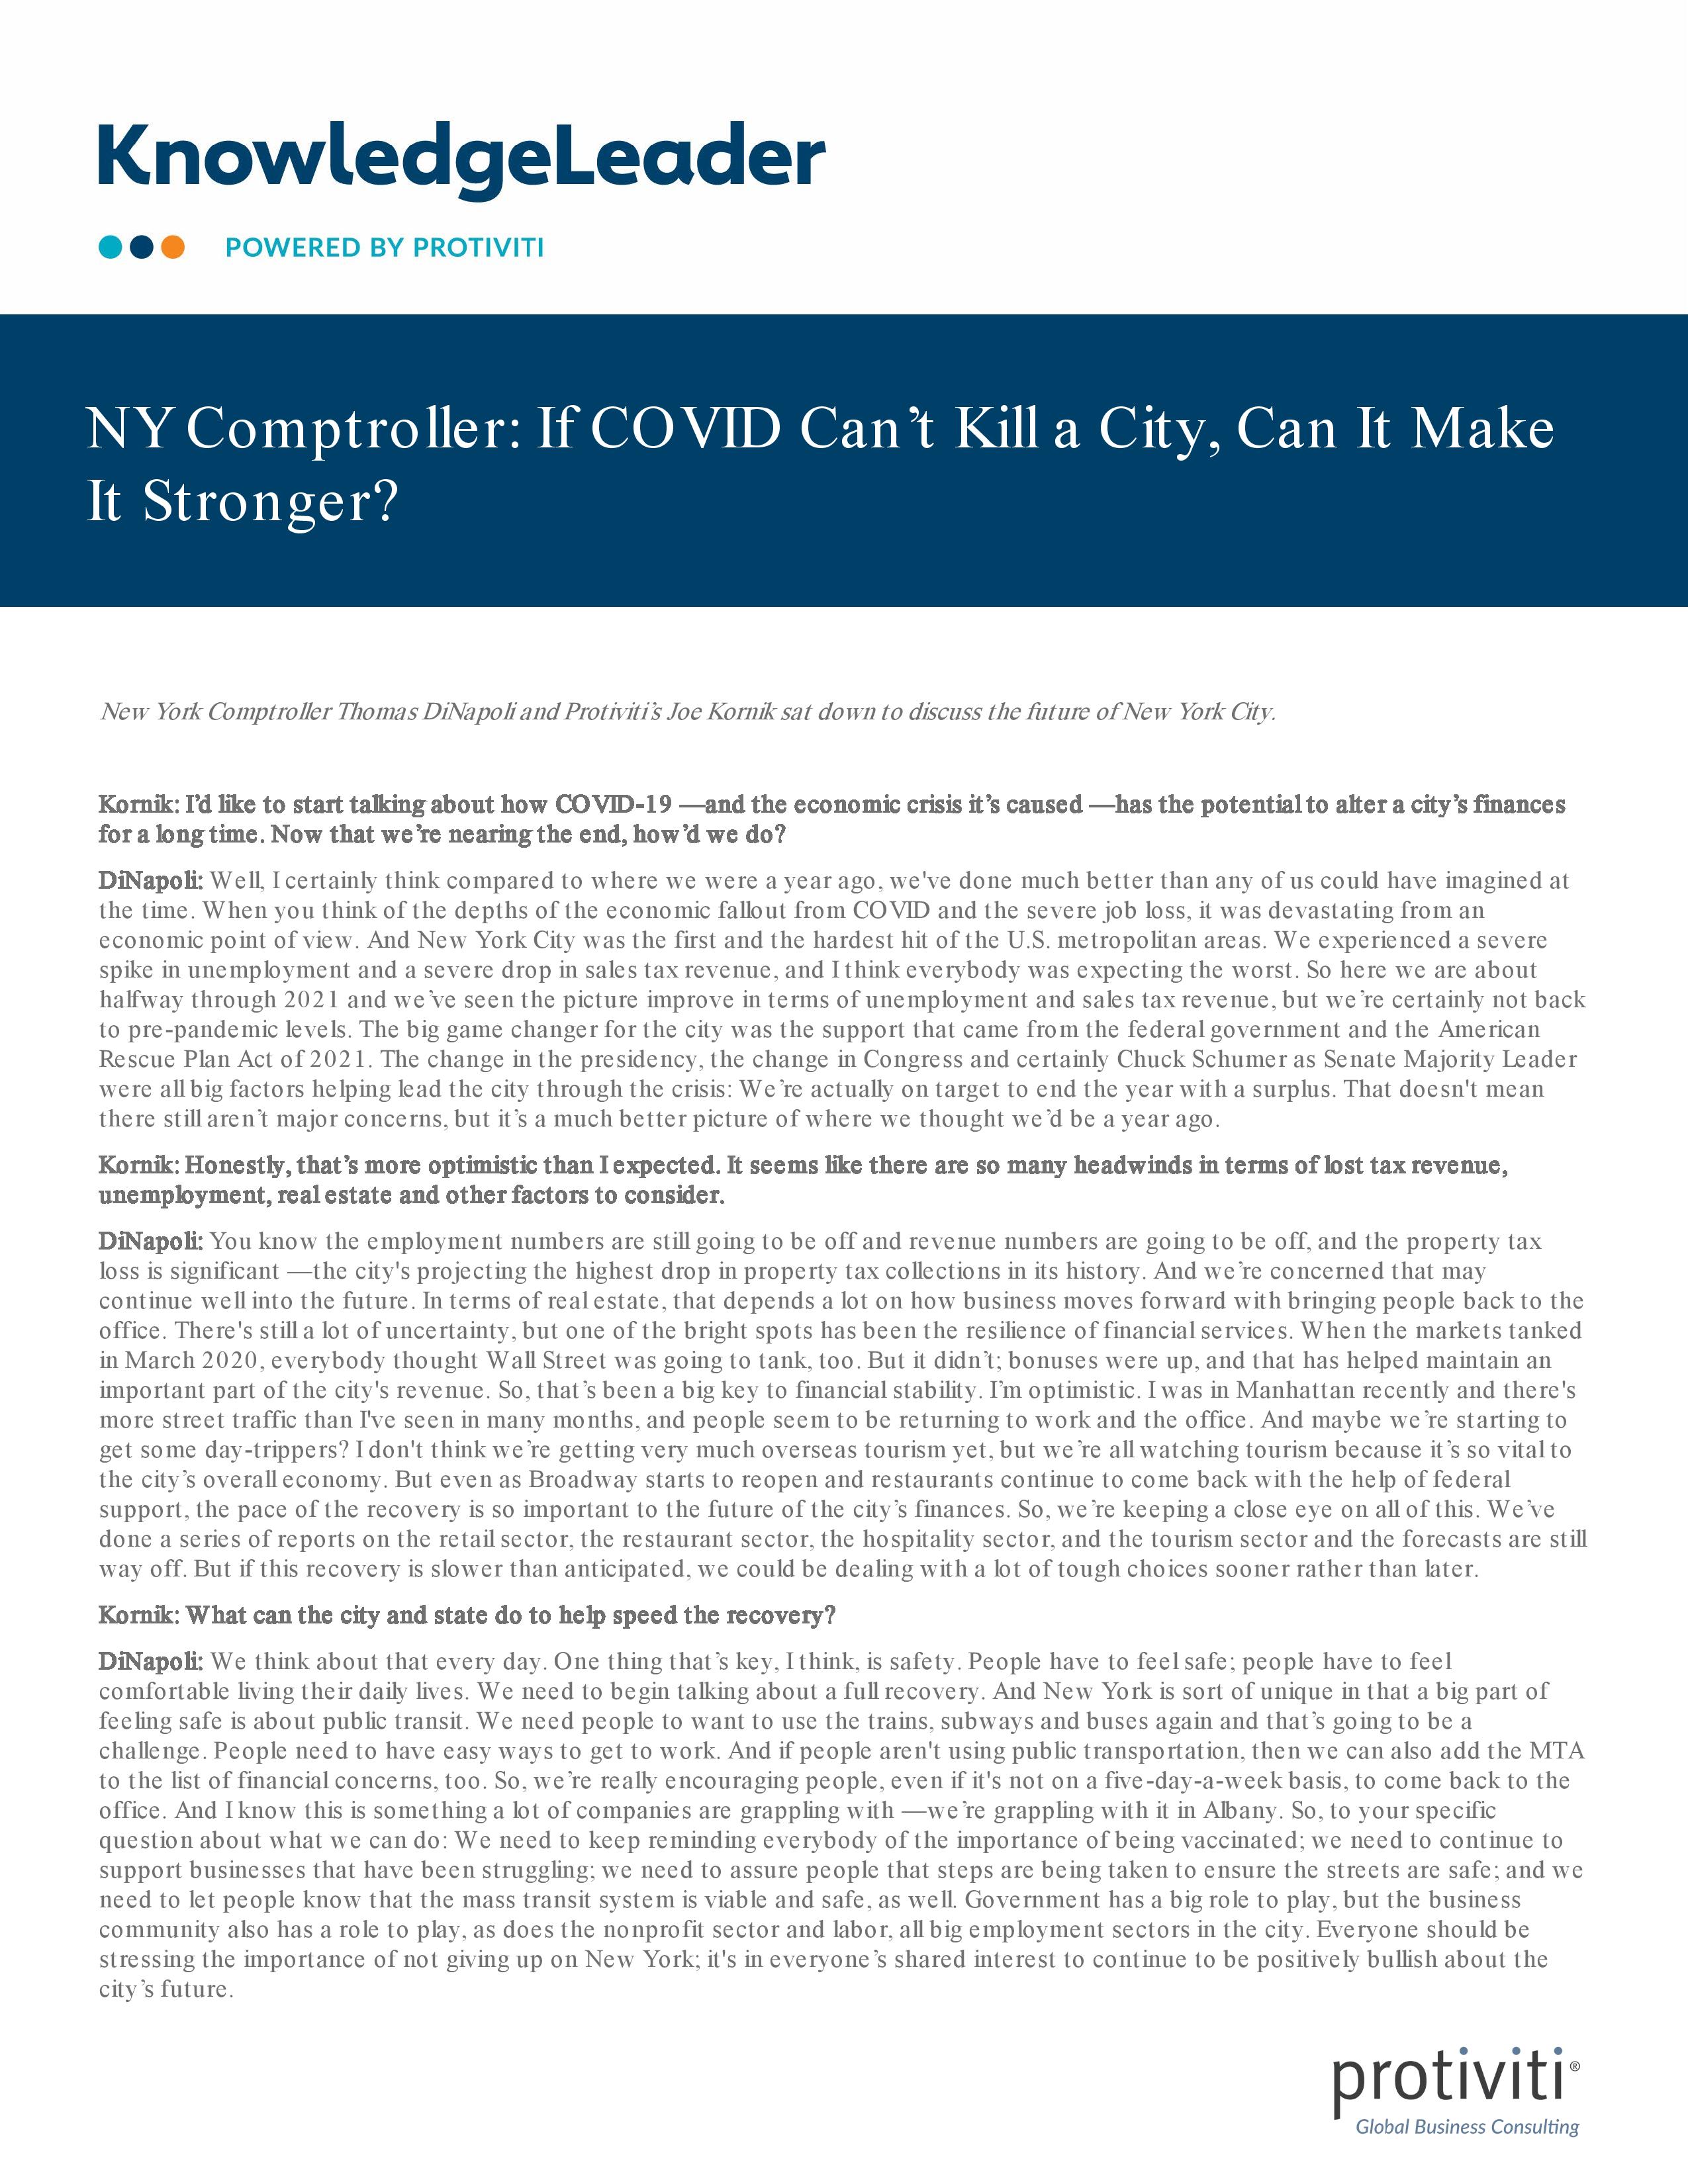 screenshot of the first page of NY Comptroller If COVID Can’t Kill a City, Can It Make It Stronger